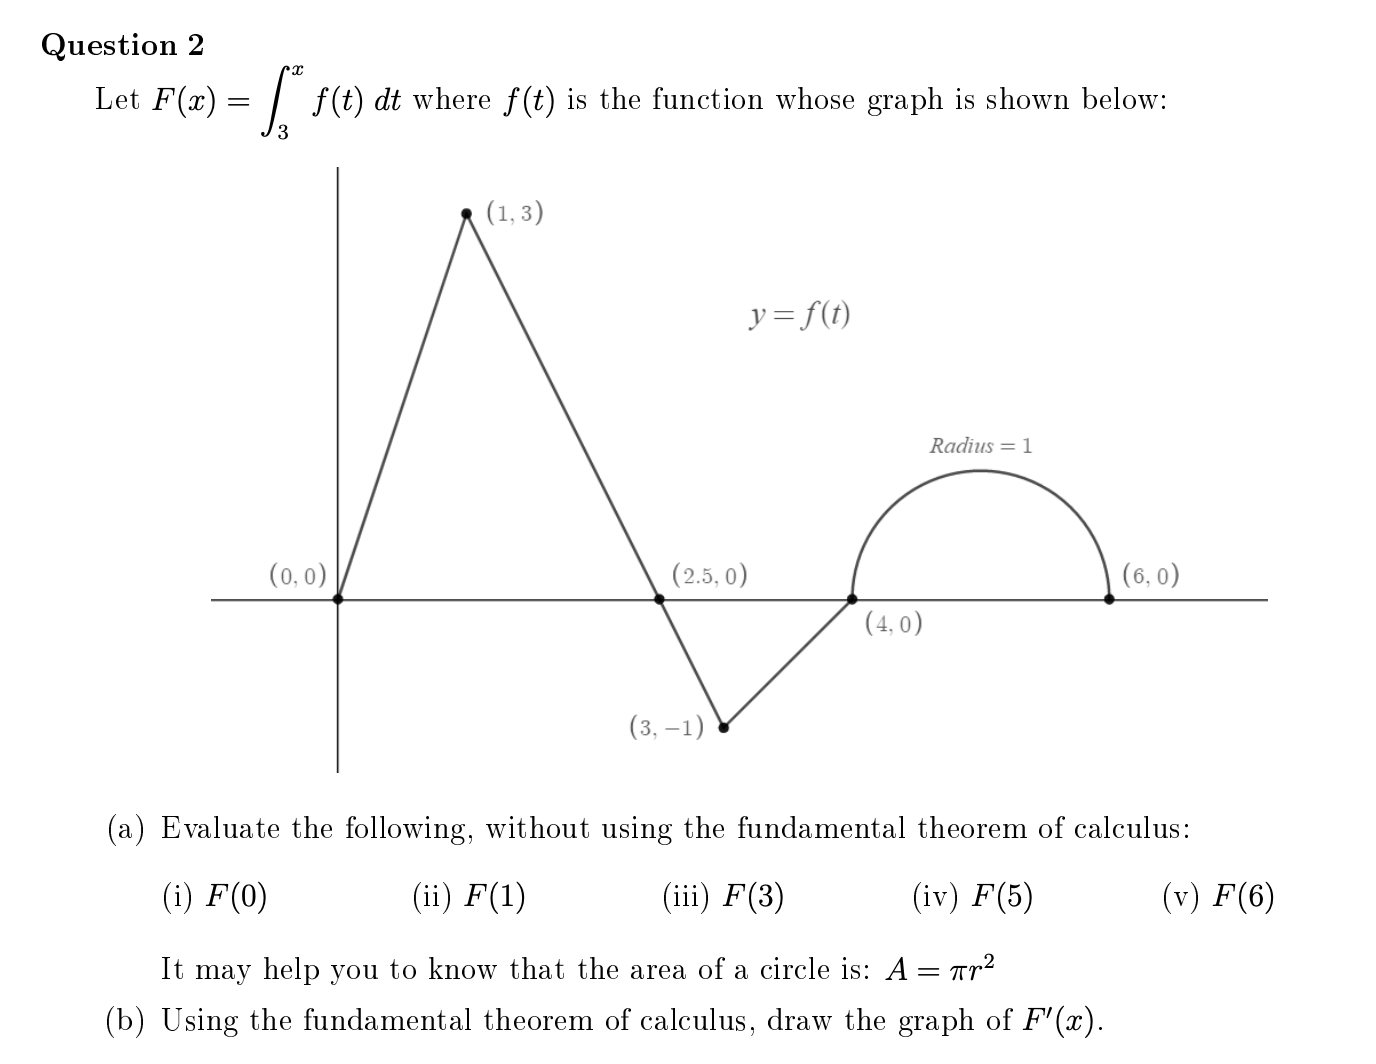 (a) Evaluate the following, without using the fundamental theorem of calculus:
(i) F(0)
(ii) F(1)
(iii) F(3)
(iv) F(5)
(v) F(6)
It may help you to know that the area of a circle is: A= rr²
(b) Using the fundamental theorem of calculus, draw the graph of F'(x).
